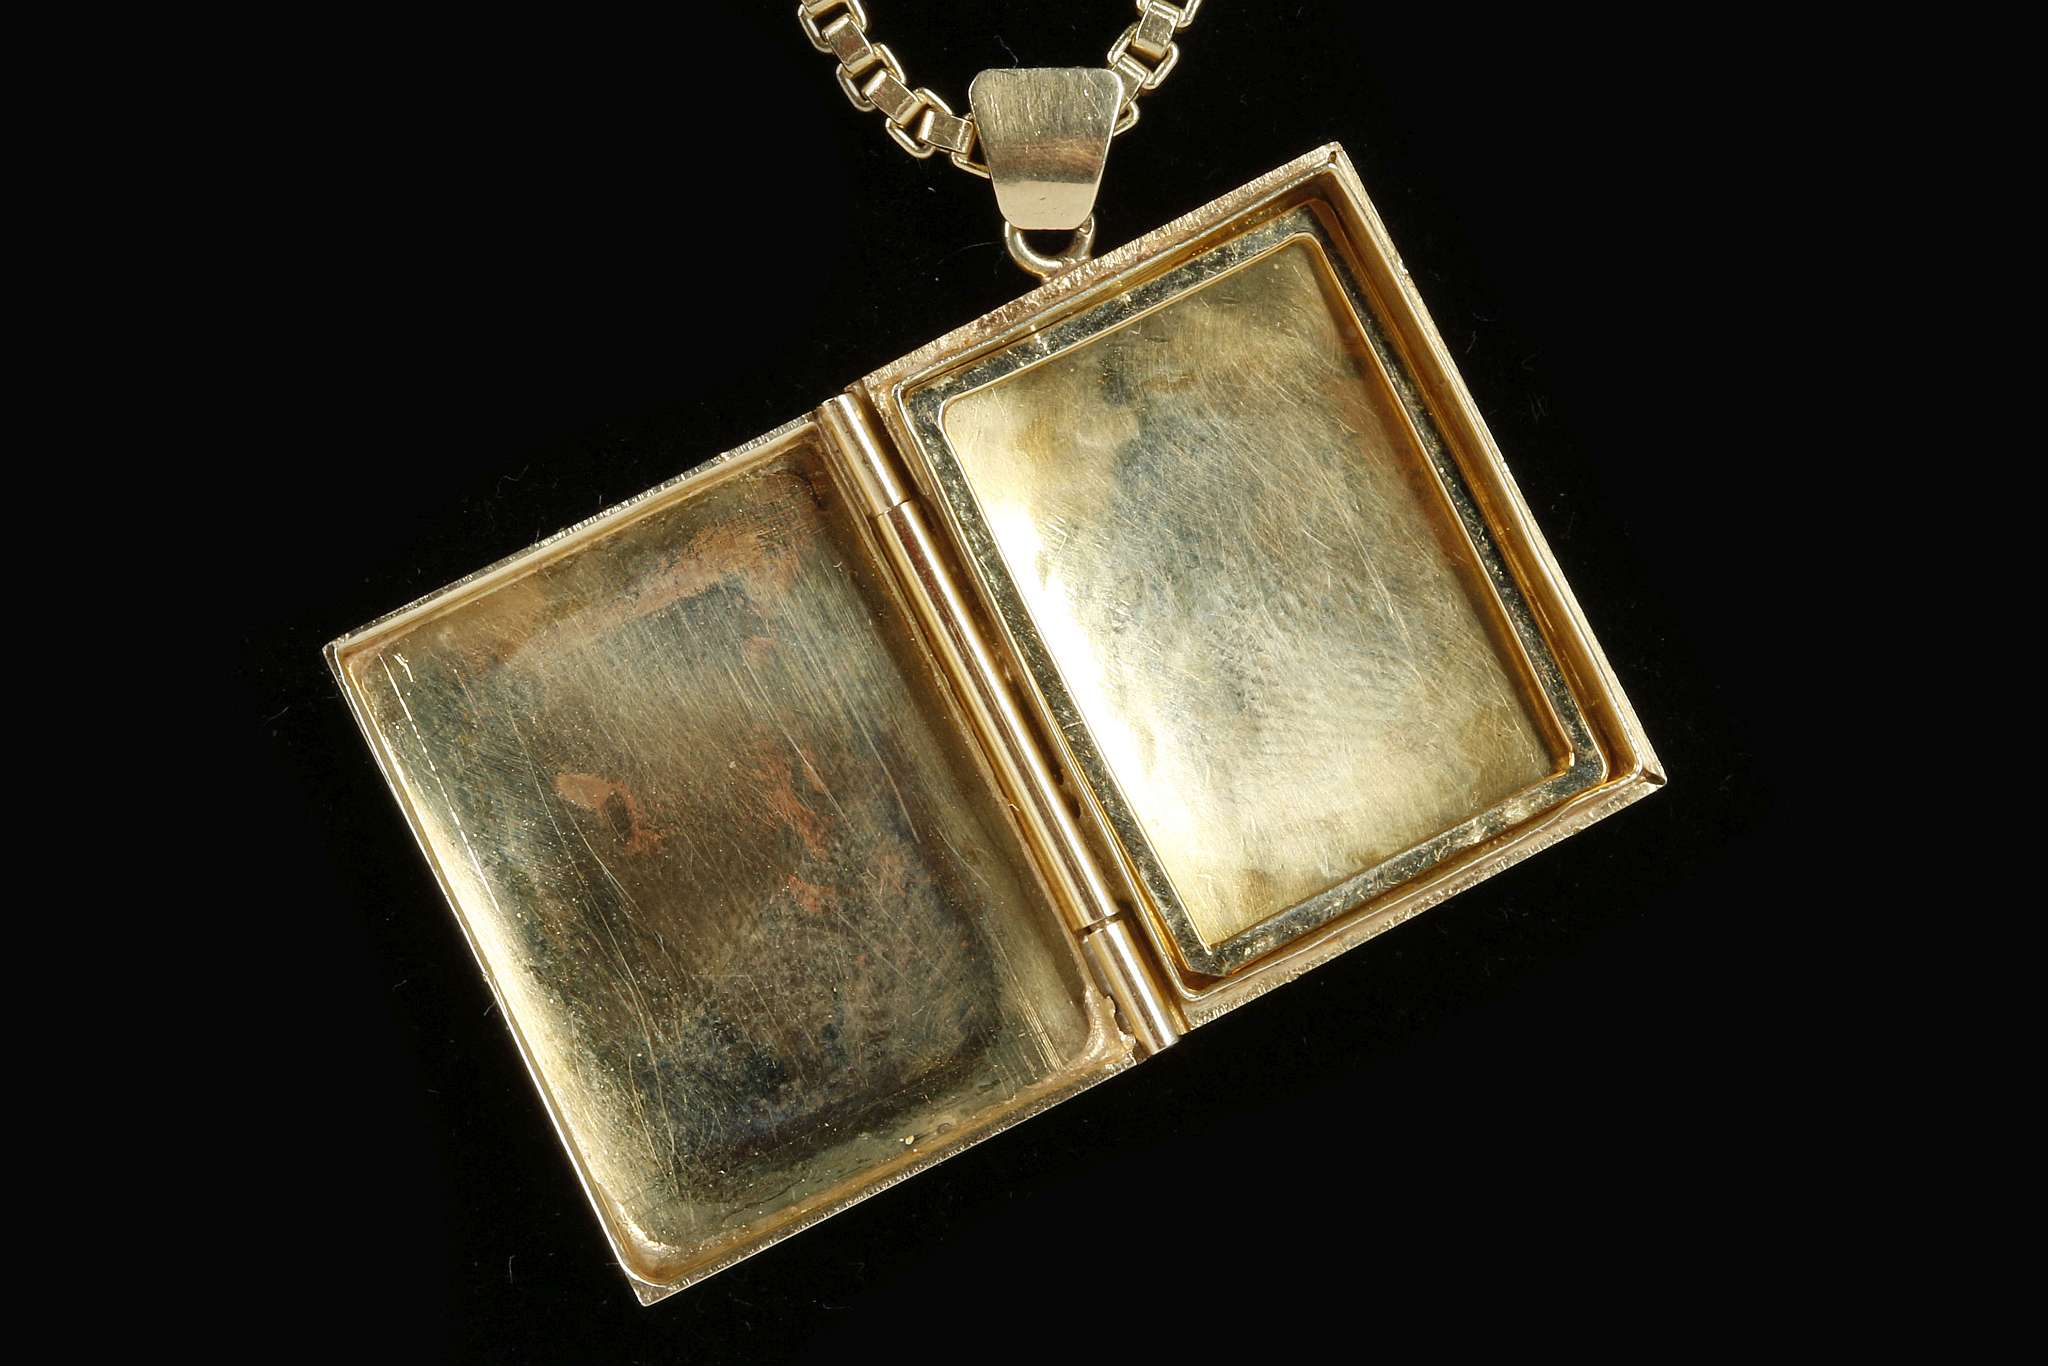 A 14k gold book-form locket, together with a heavy